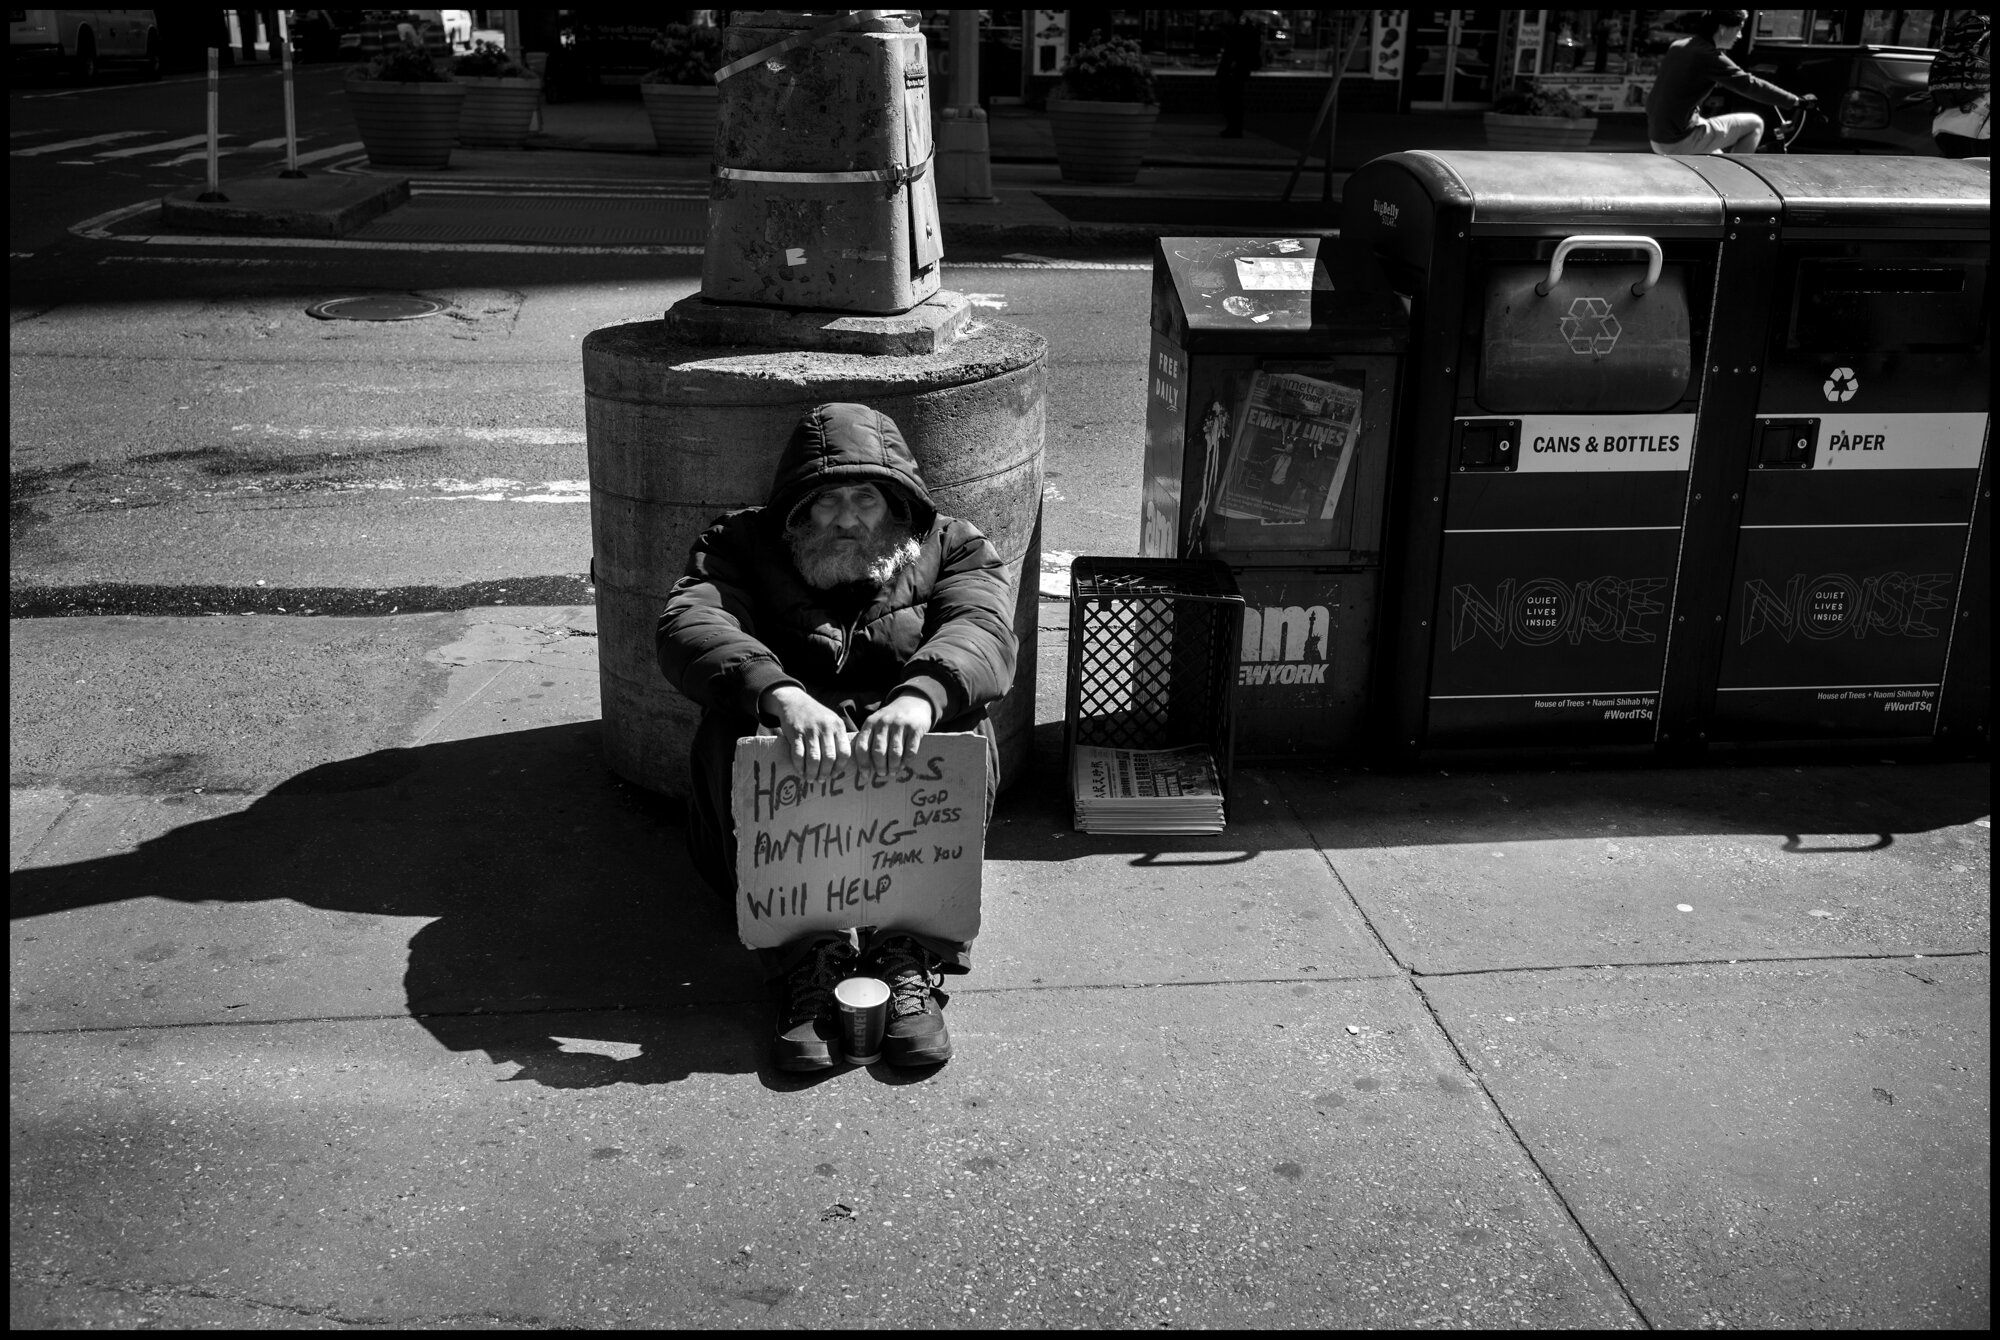  A homeless man sits near Times Square.  March 21, 2020. © Peter Turnley.  ID# 01-016 